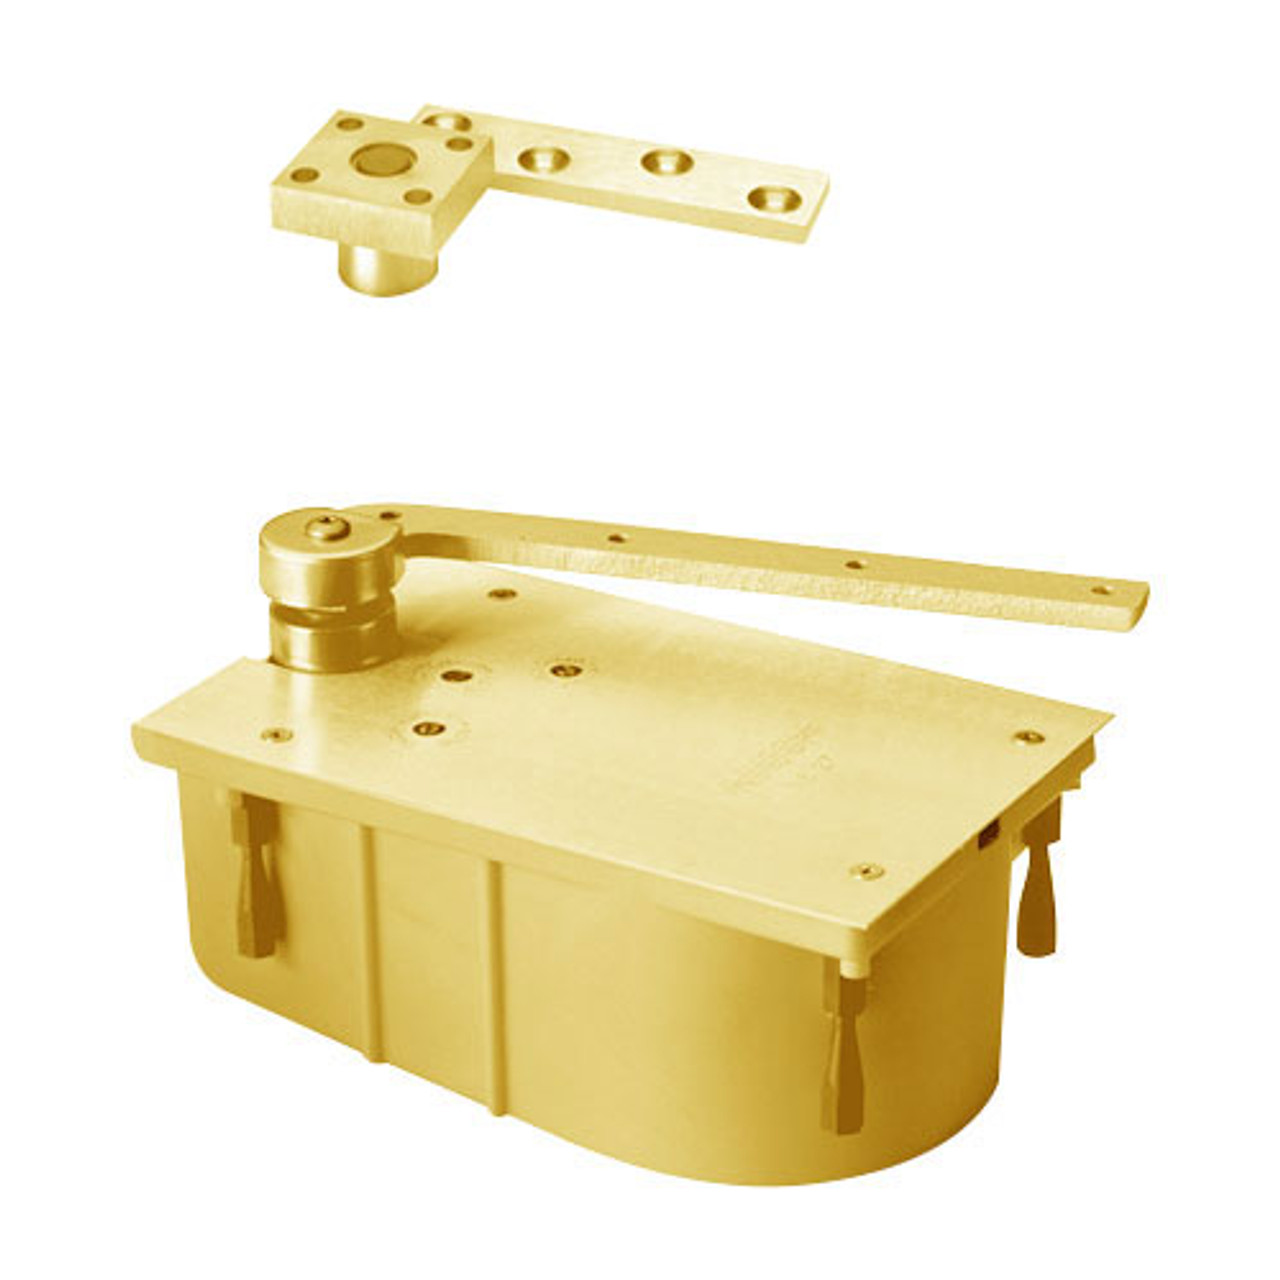 427-95N-LH-605 Rixson 427 Series Heavy Duty 3/4" Offset Hung Floor Closer in Bright Brass Finish